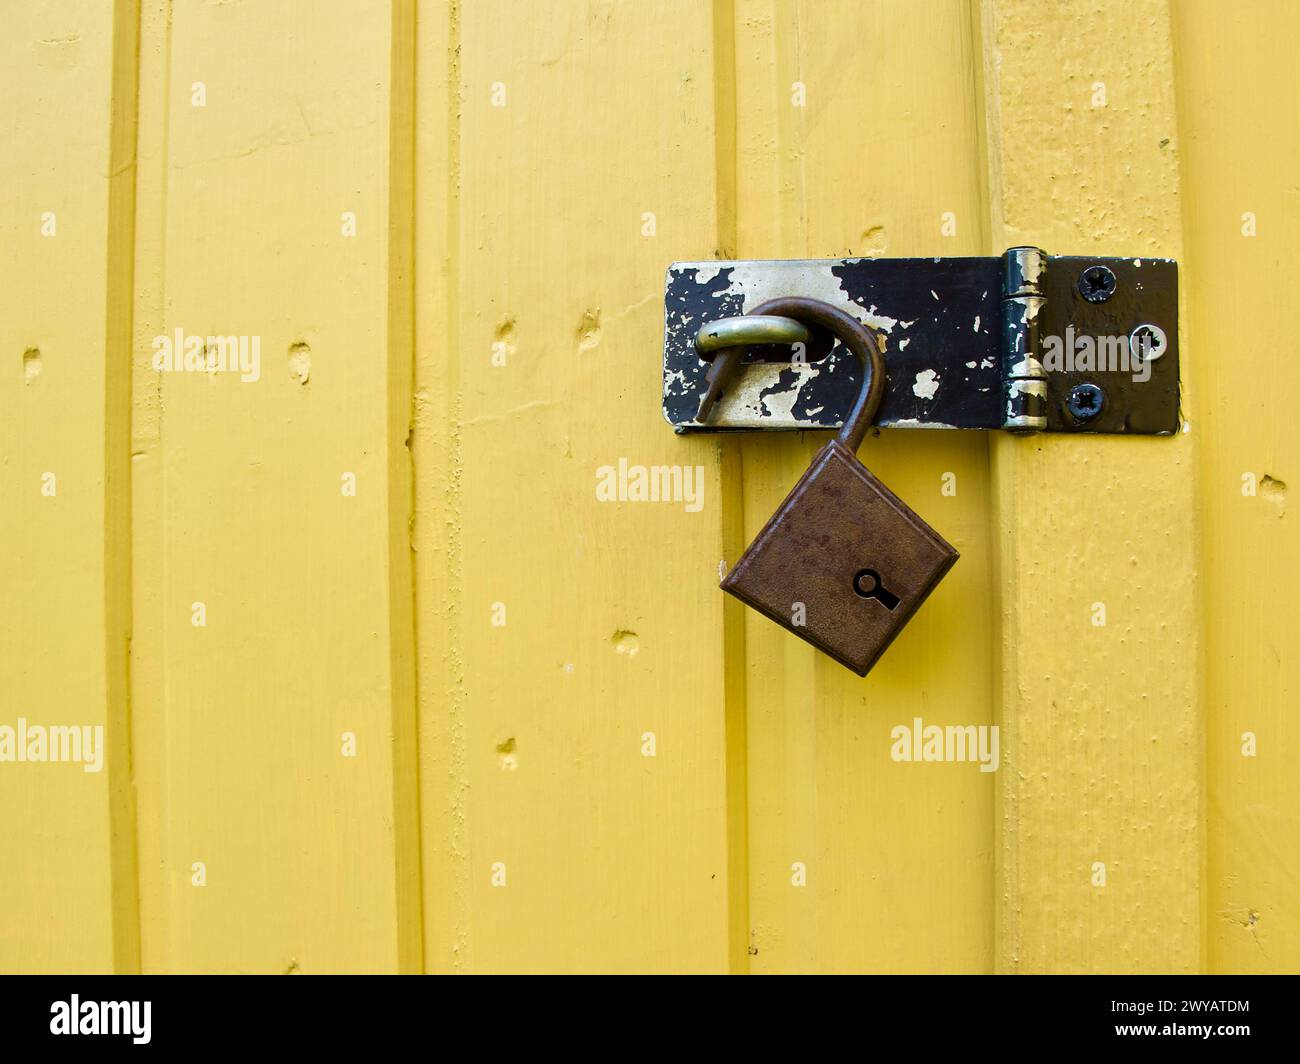 An old and rusty unlocked padlock hangs in the worn bracken of a yellow wooden door to a tool shed in the garden. Stock Photo